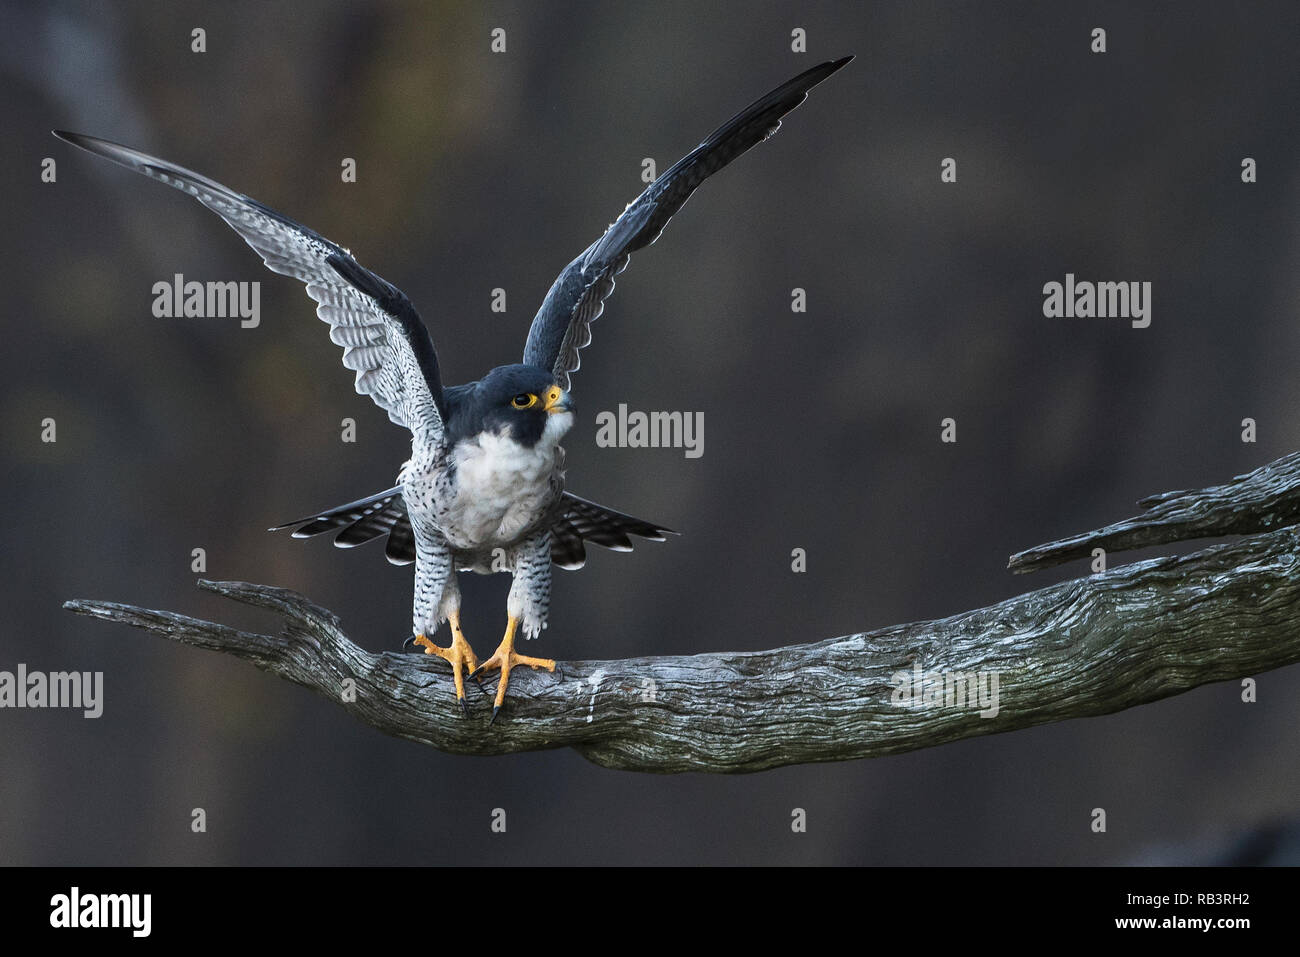 Adult peregrine falcon with raised wings perched on snag Stock Photo